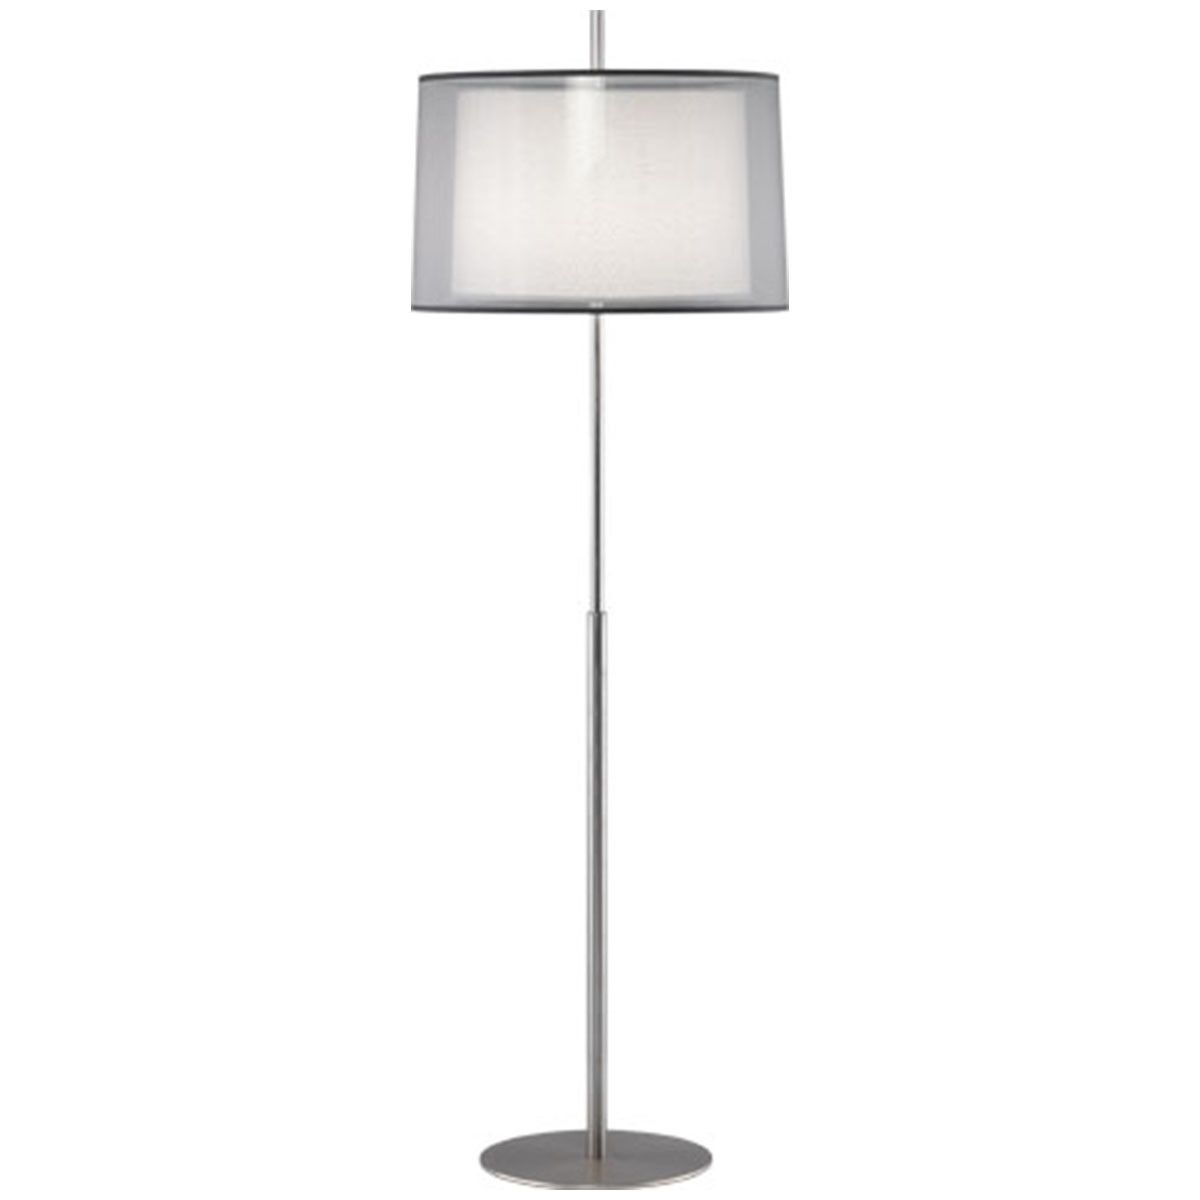 Robert Abbey Saturnia Floor Lamp S2191 Contemporary Floor with sizing 1200 X 1200